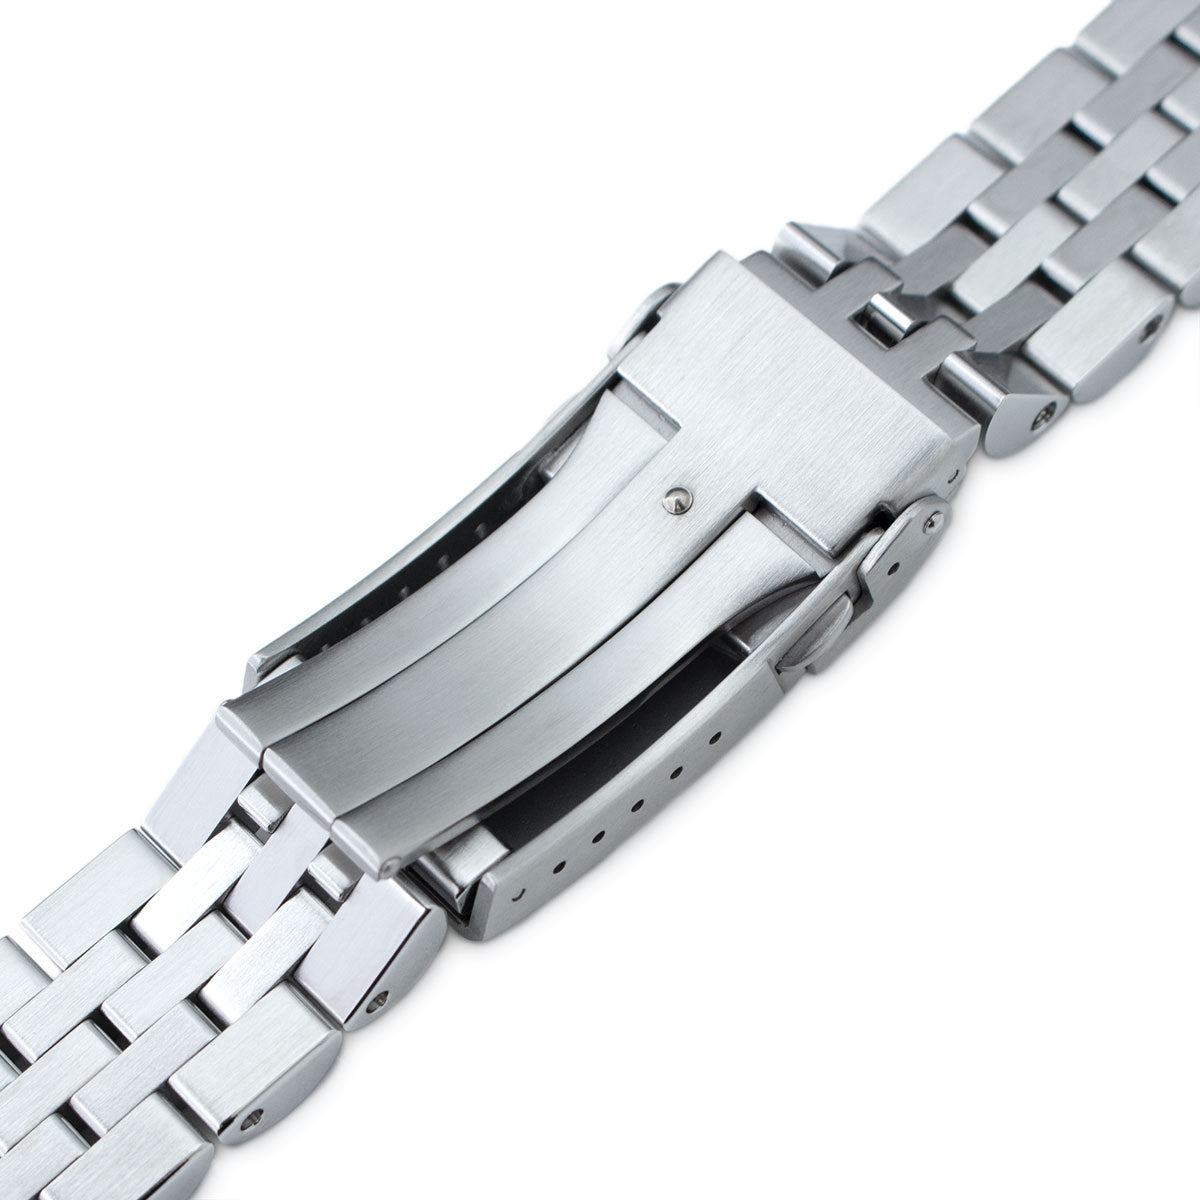  MiLTAT 22mm Watch Band for Seiko Turtle SRP773 SRP775